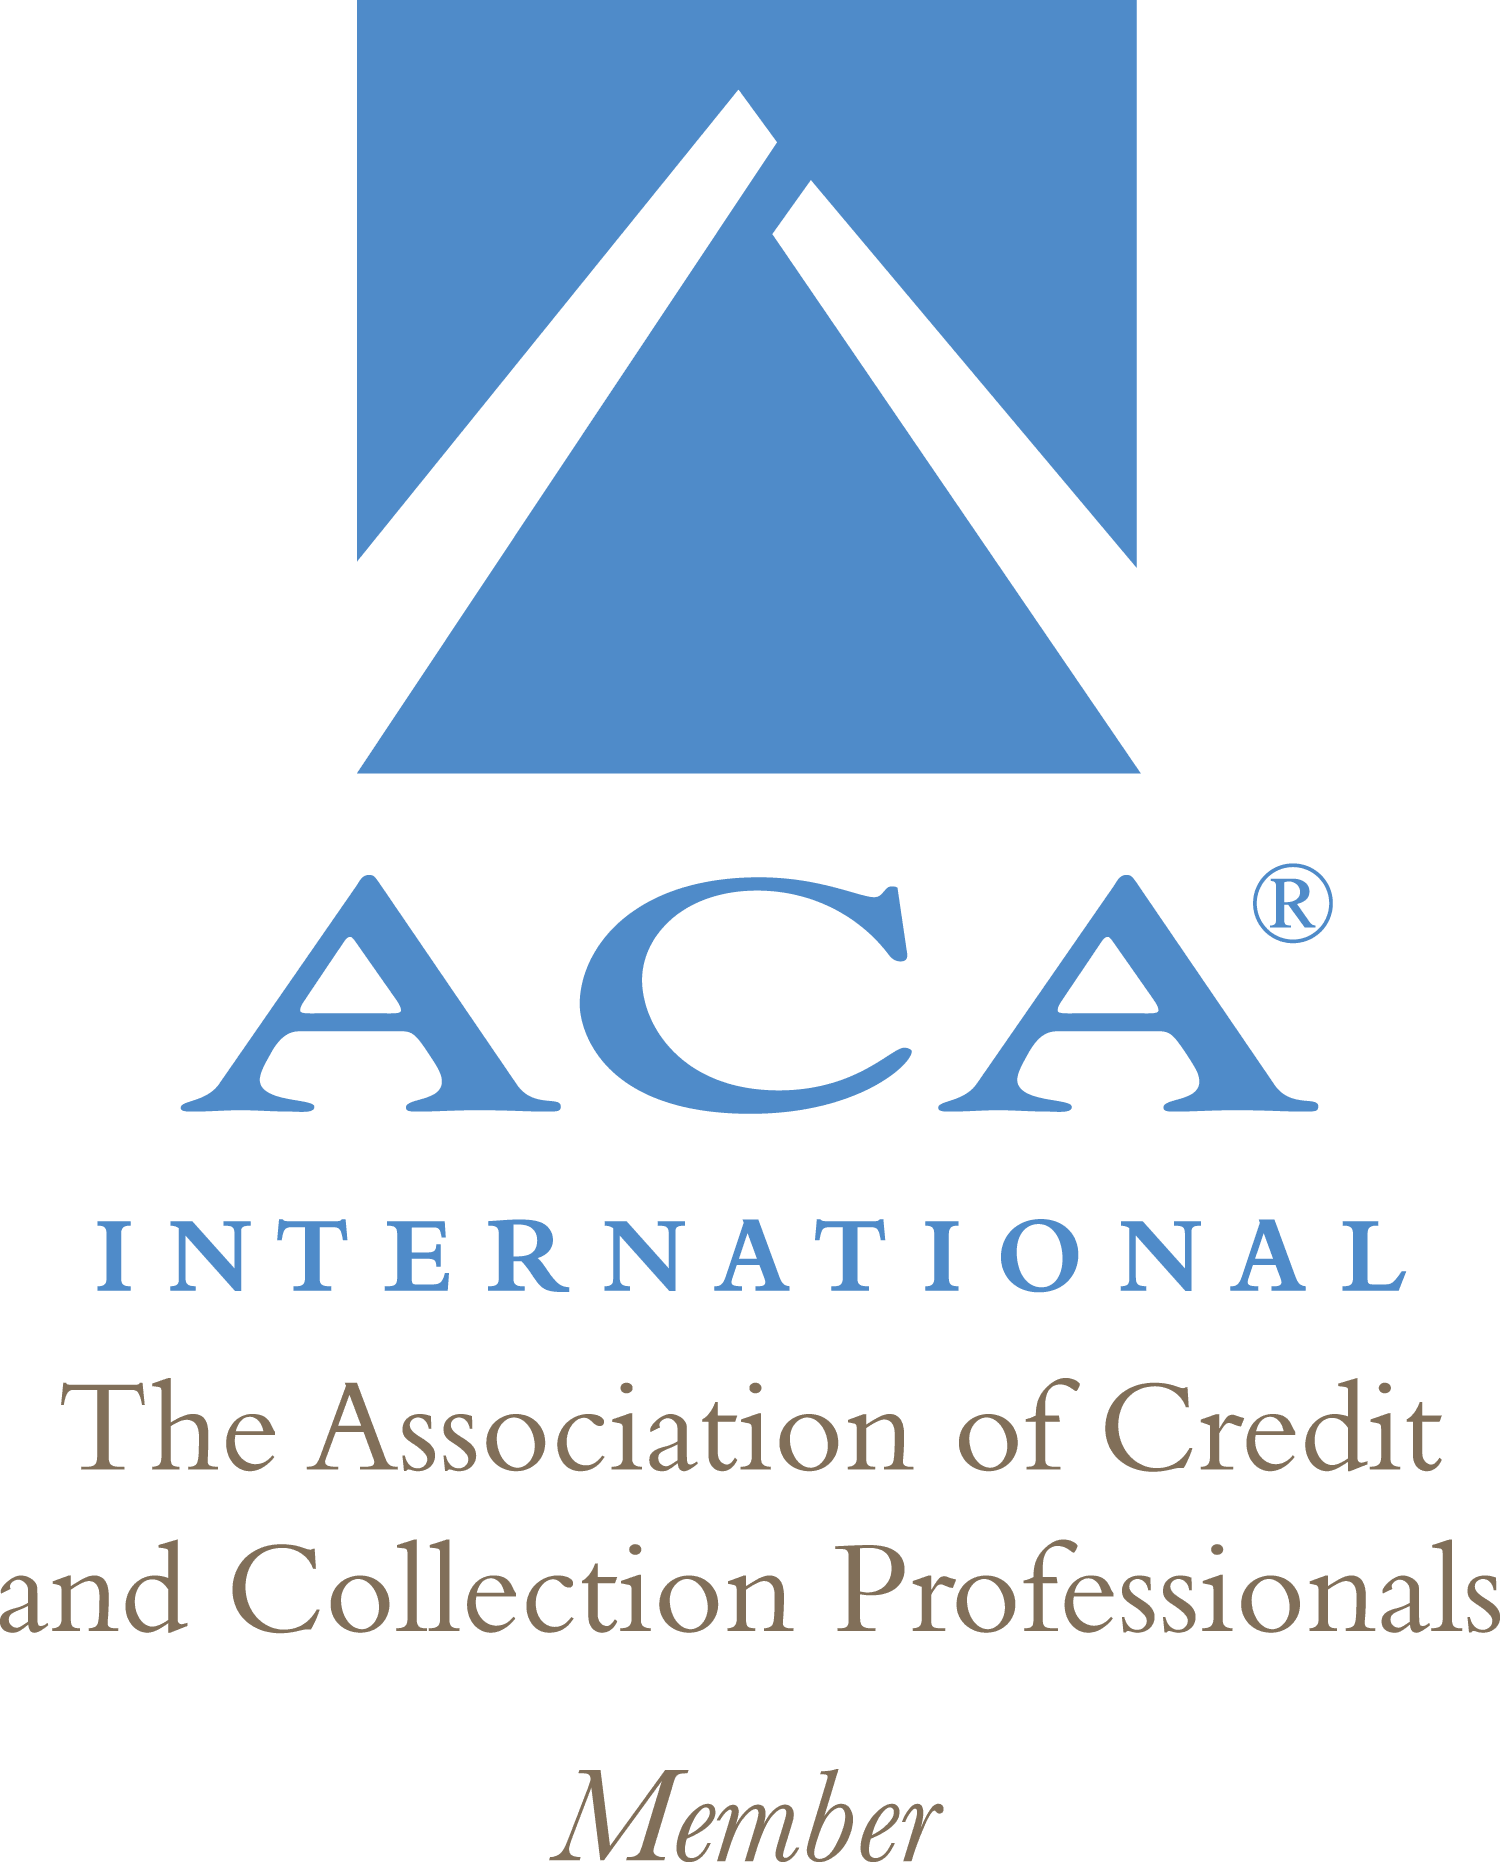 United Credit and Collections, Inc.